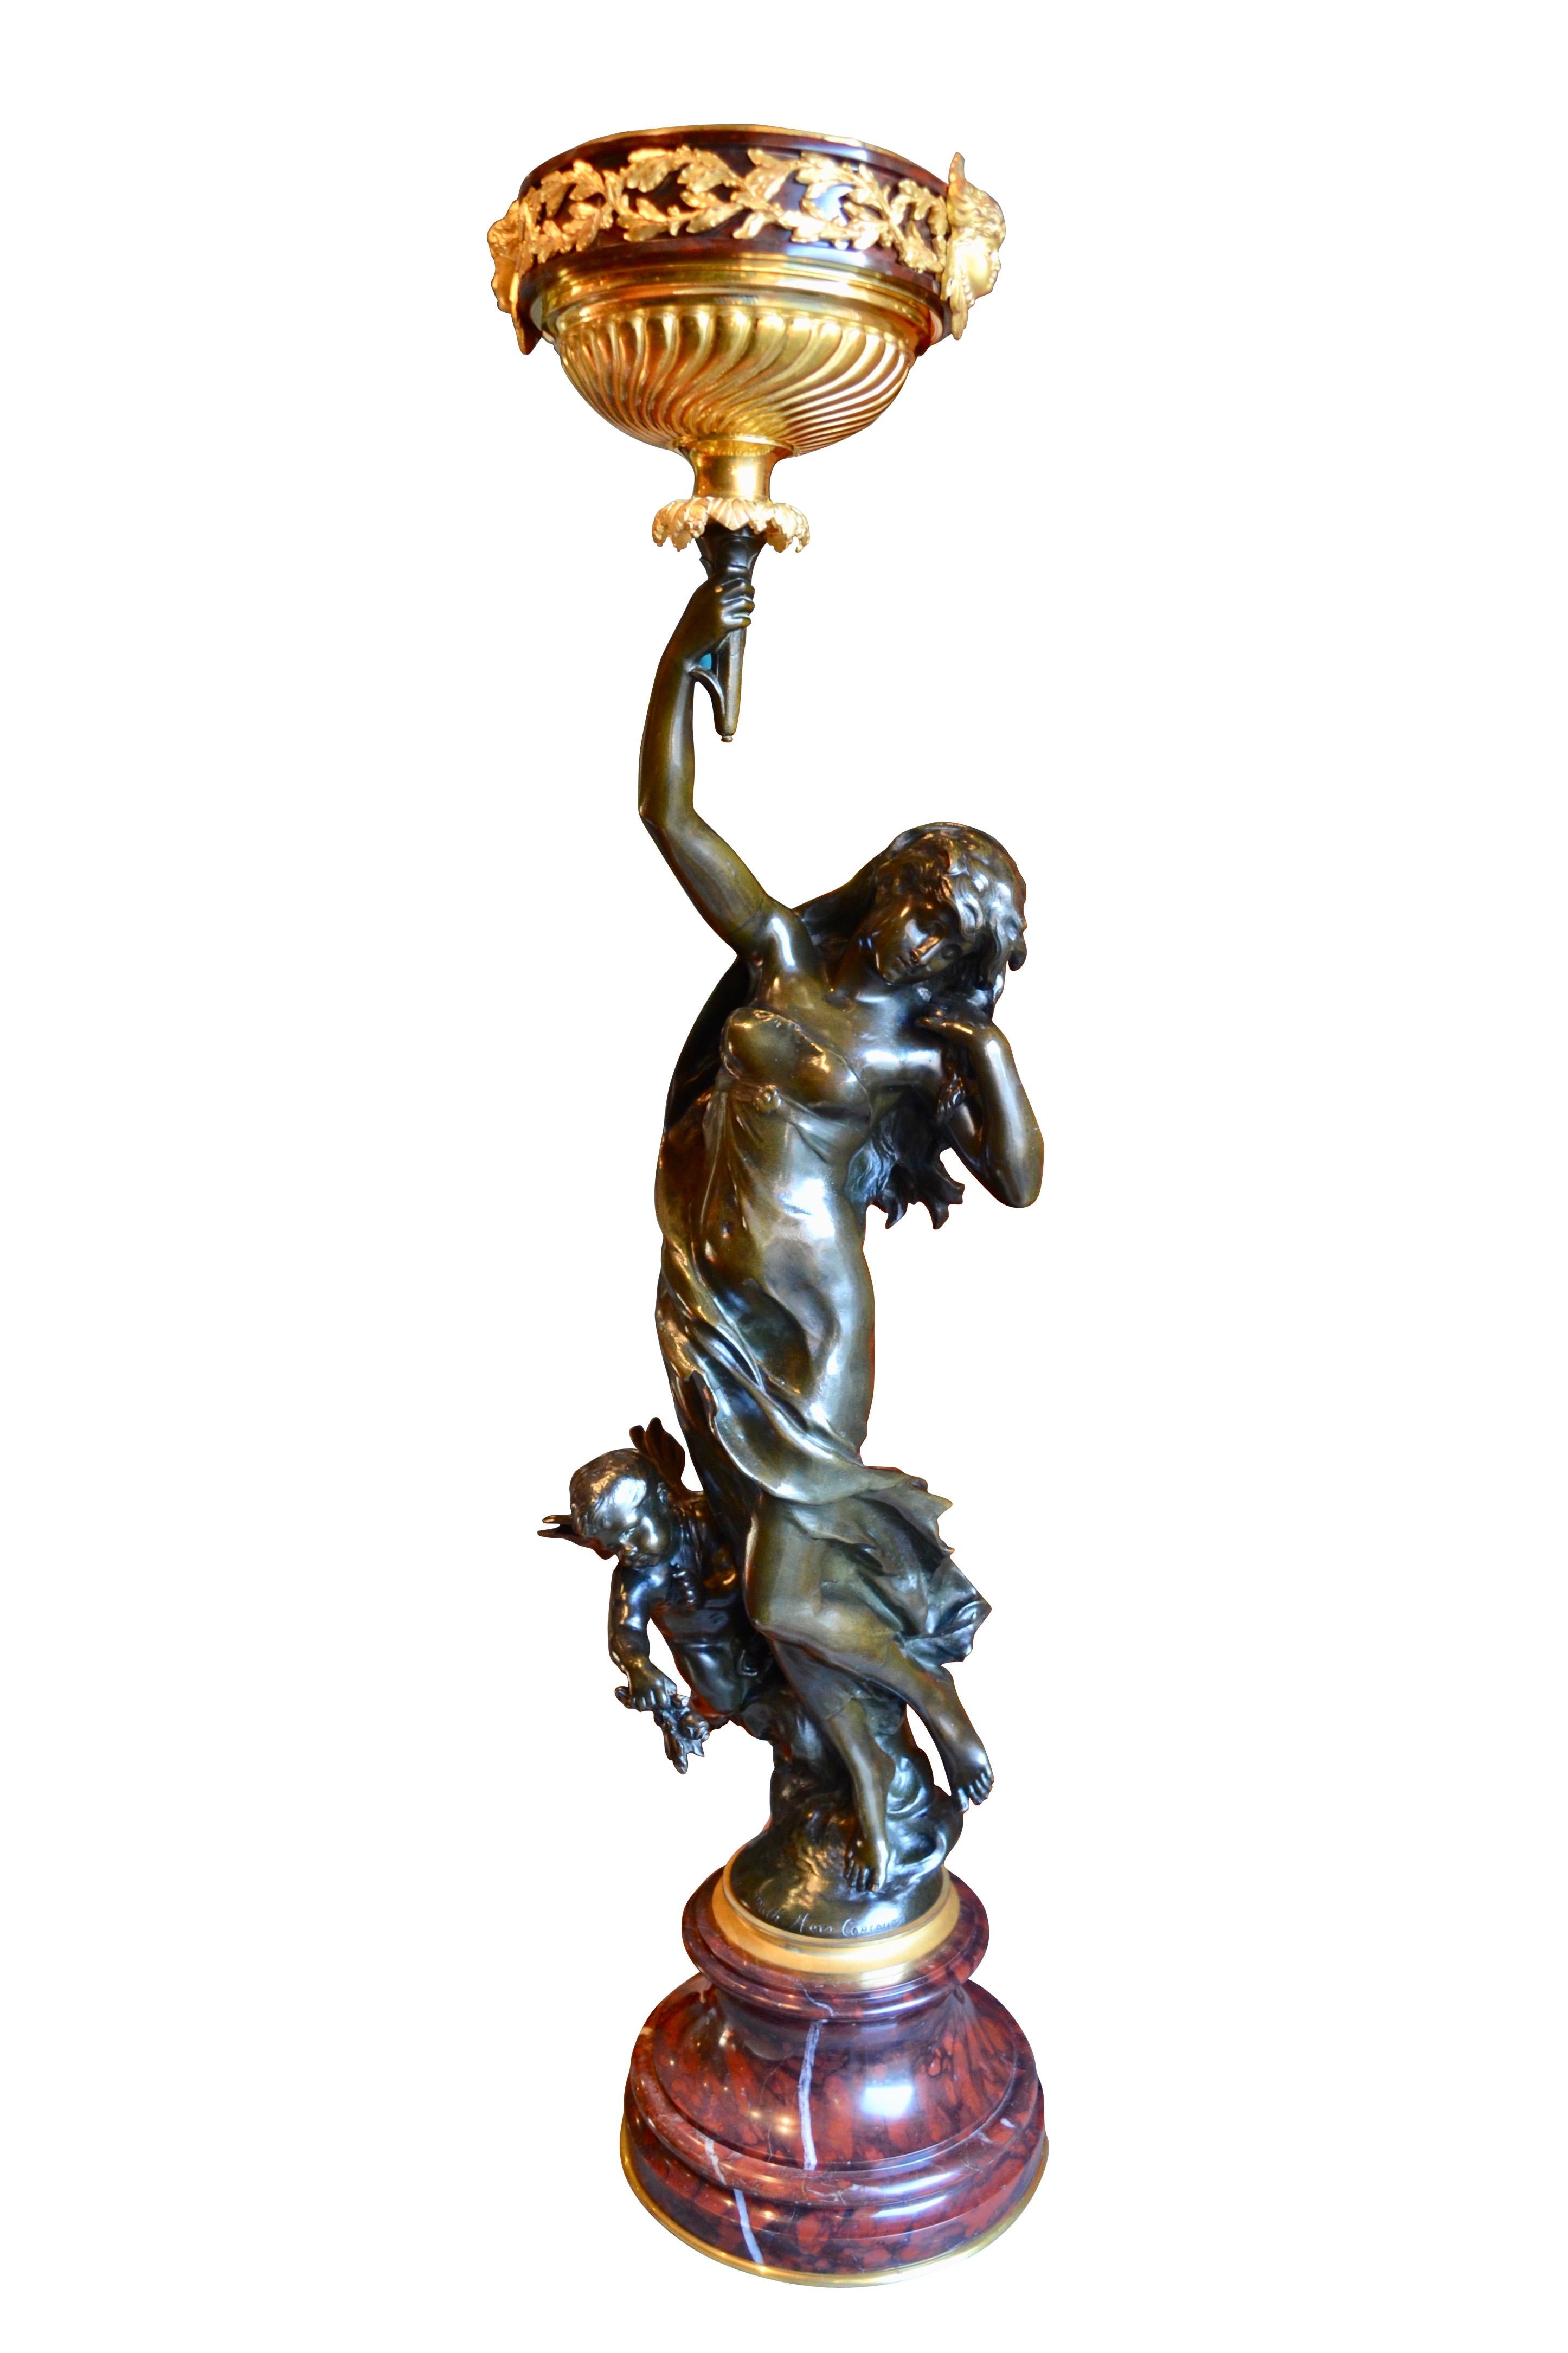 A rare  bronze statue of na Nymph and a clinging putto by famous French 19 Century sculptor  Mathurin Moreau which was custom transformed into an oil lamp. The nymph is is holding aloft a flambeau  which was part of the bronze by 
 Moreau to which